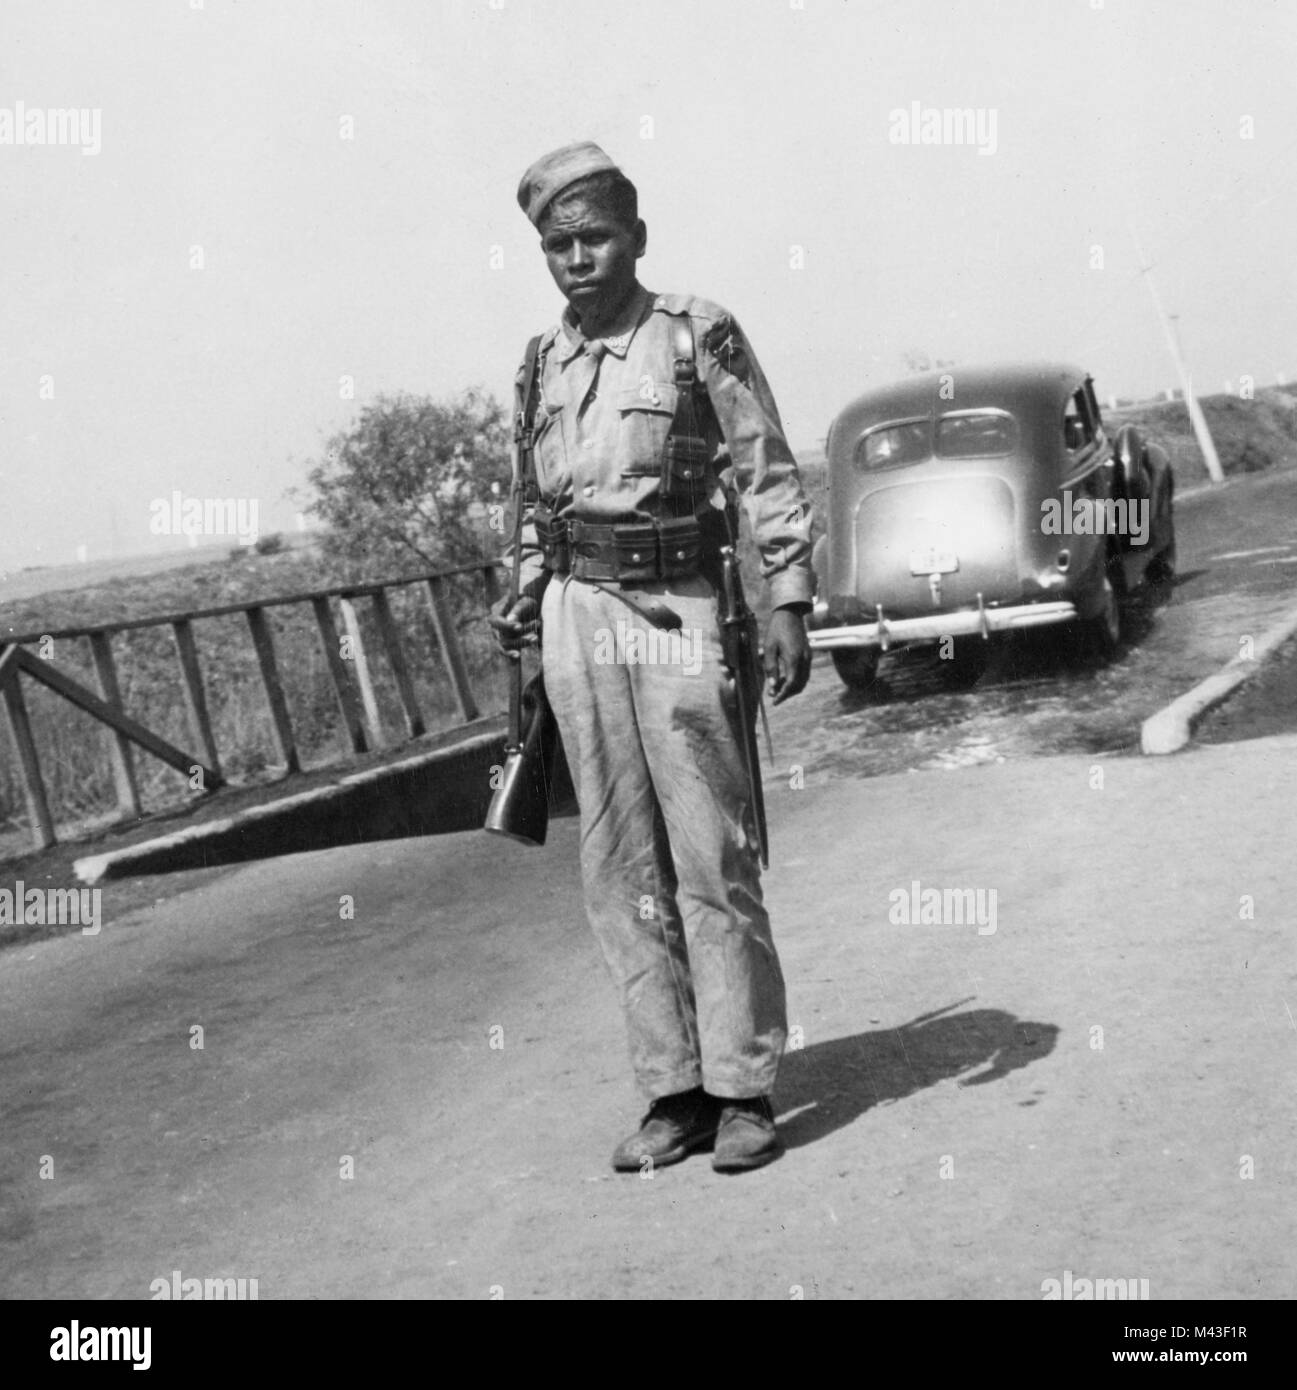 Border guard in Mexico screening cars for foot and mouth disease, ca. 1947.  Cars drive through solution in background to prevent the spread of the disease. Passengers are also required to walk through the solution. Stock Photo